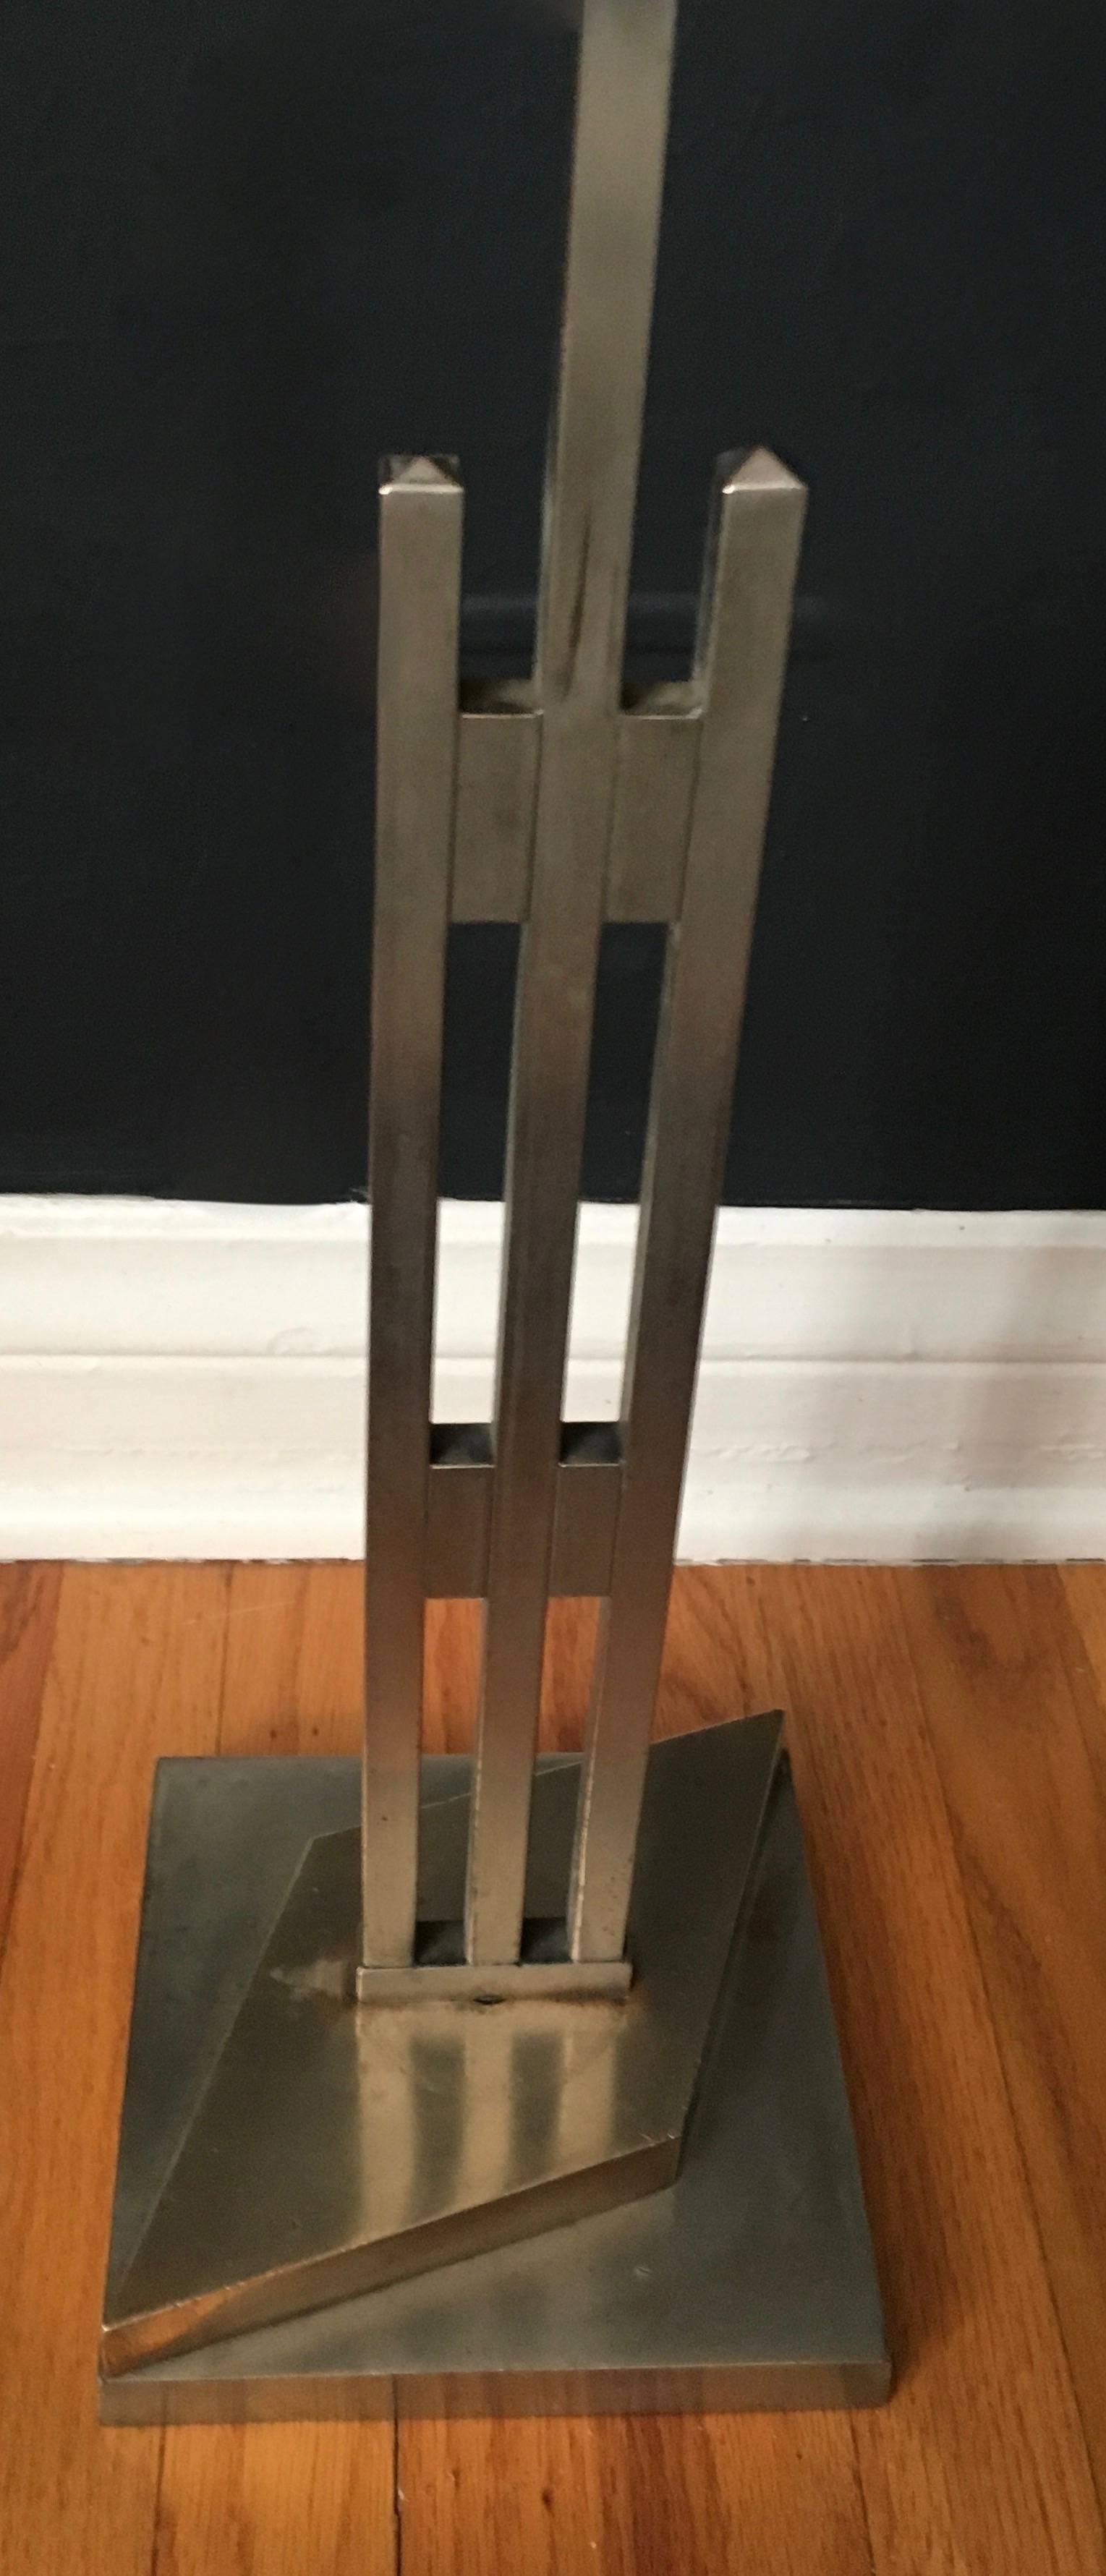 Handsome vintage adjustable Art Deco valet stand - most likely utilized for display purposes in a fine department store.

The stand is beautifully made of steel with brass details on the bottom - uniquely designed with thoughtful attention. The